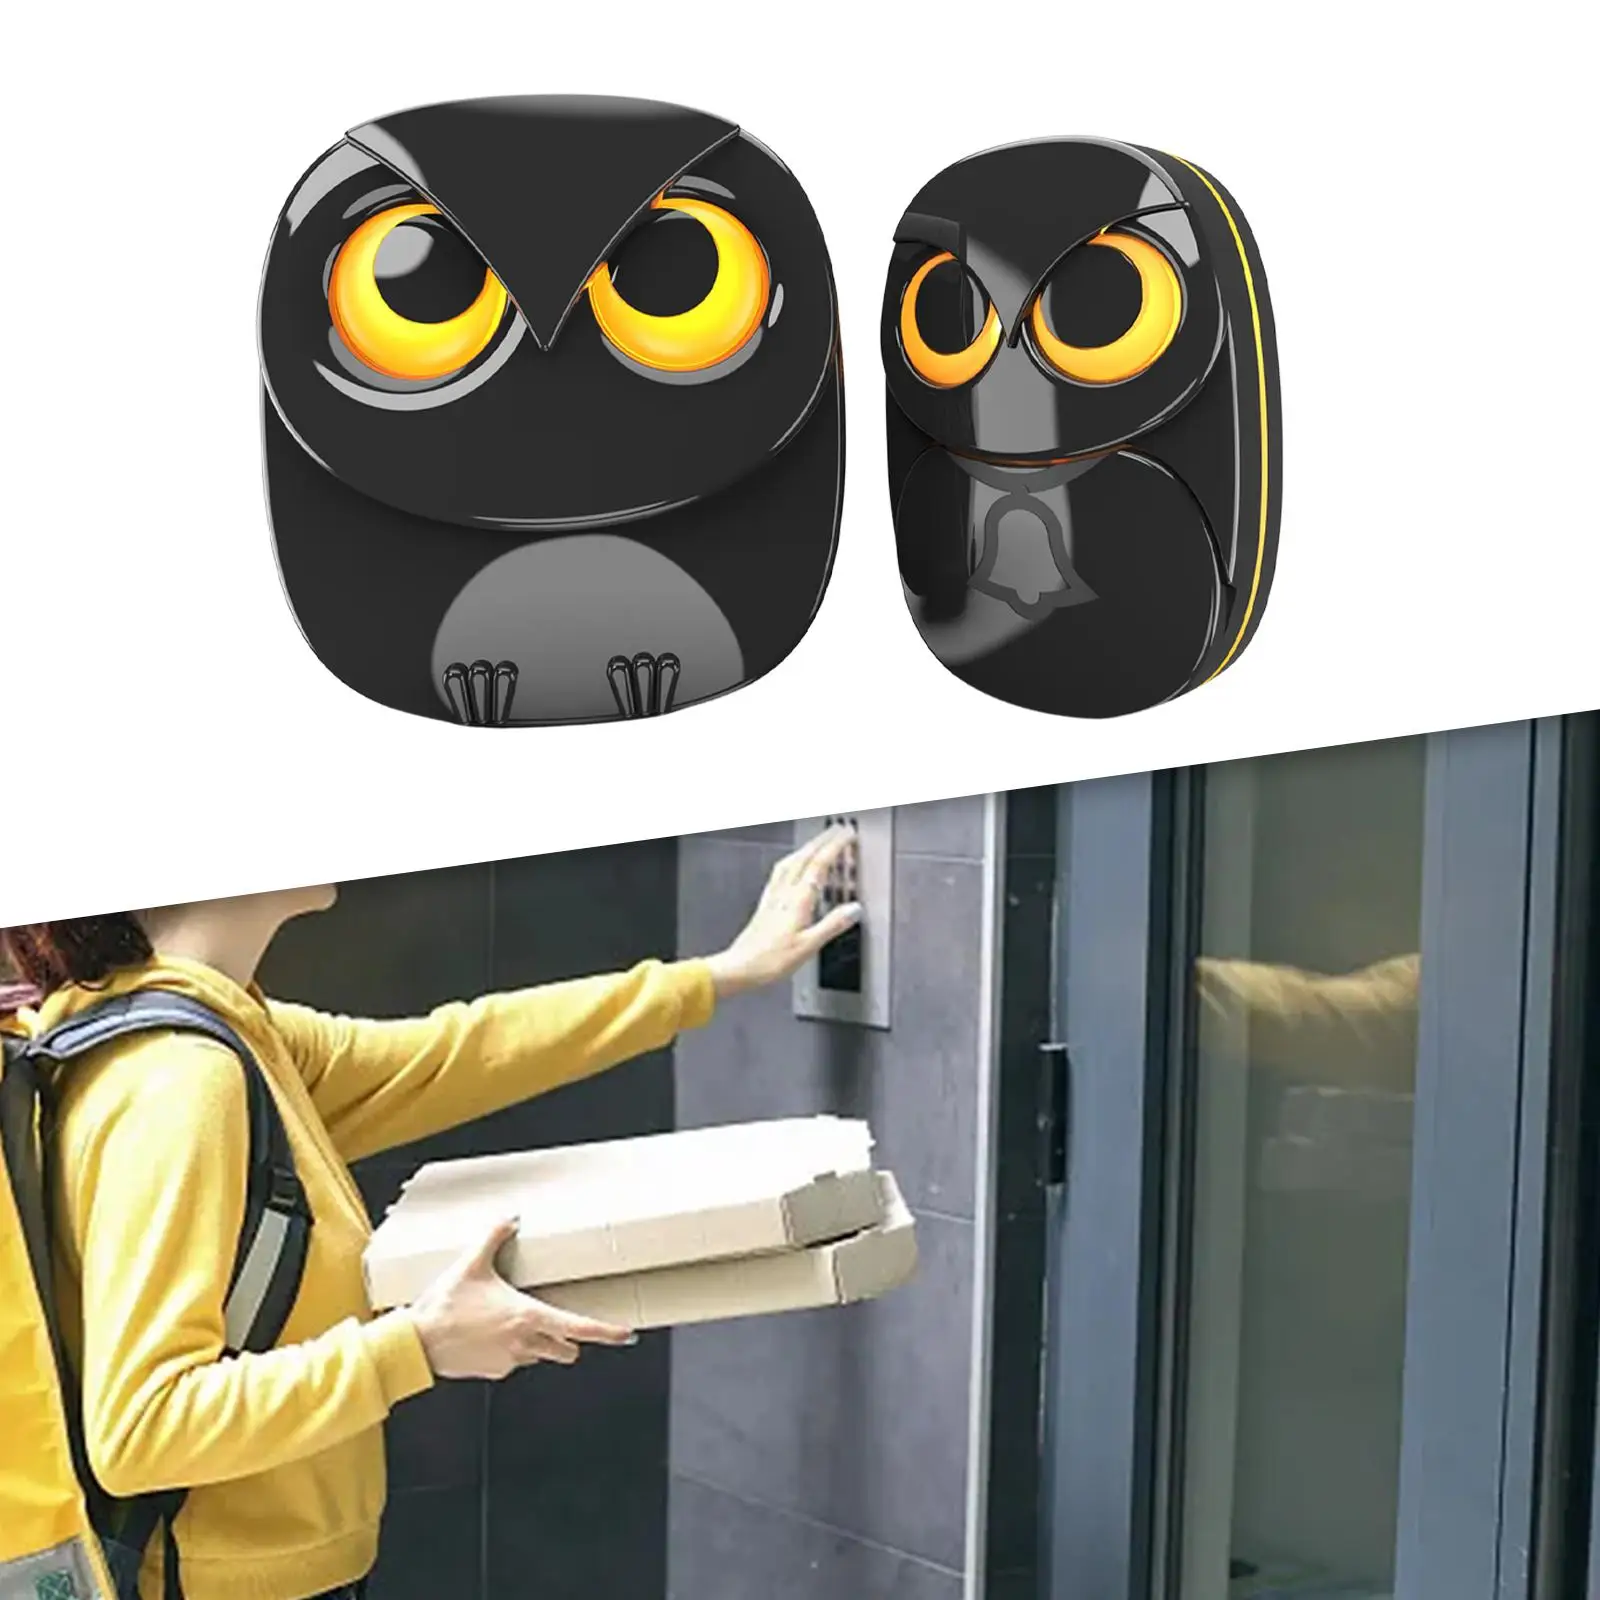 Wireless Driveway Security Alarm Cute Equipment Simple to Use Easy Installation Owl Shape for Front Porch Shed Gate Home EU Plug